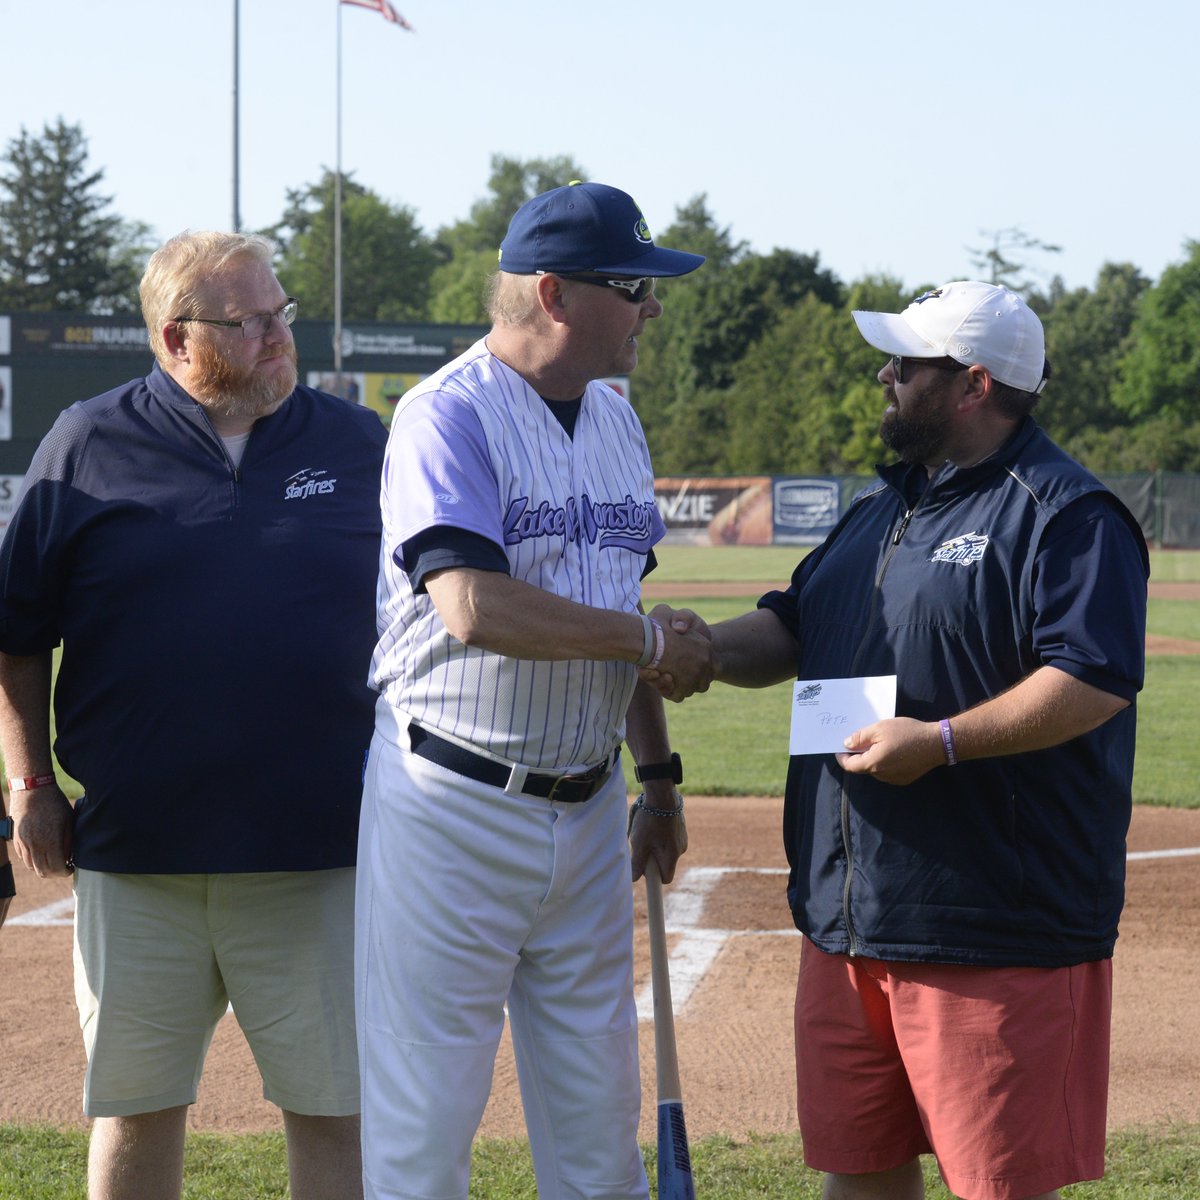 The Westfield Starfires are saddened to learn of the passing of @VTLakeMonsters head coach Pete Wilk. He was a tremendous baseball mind, but far more importantly dedicated to leading the young men he coached to be great people as well.